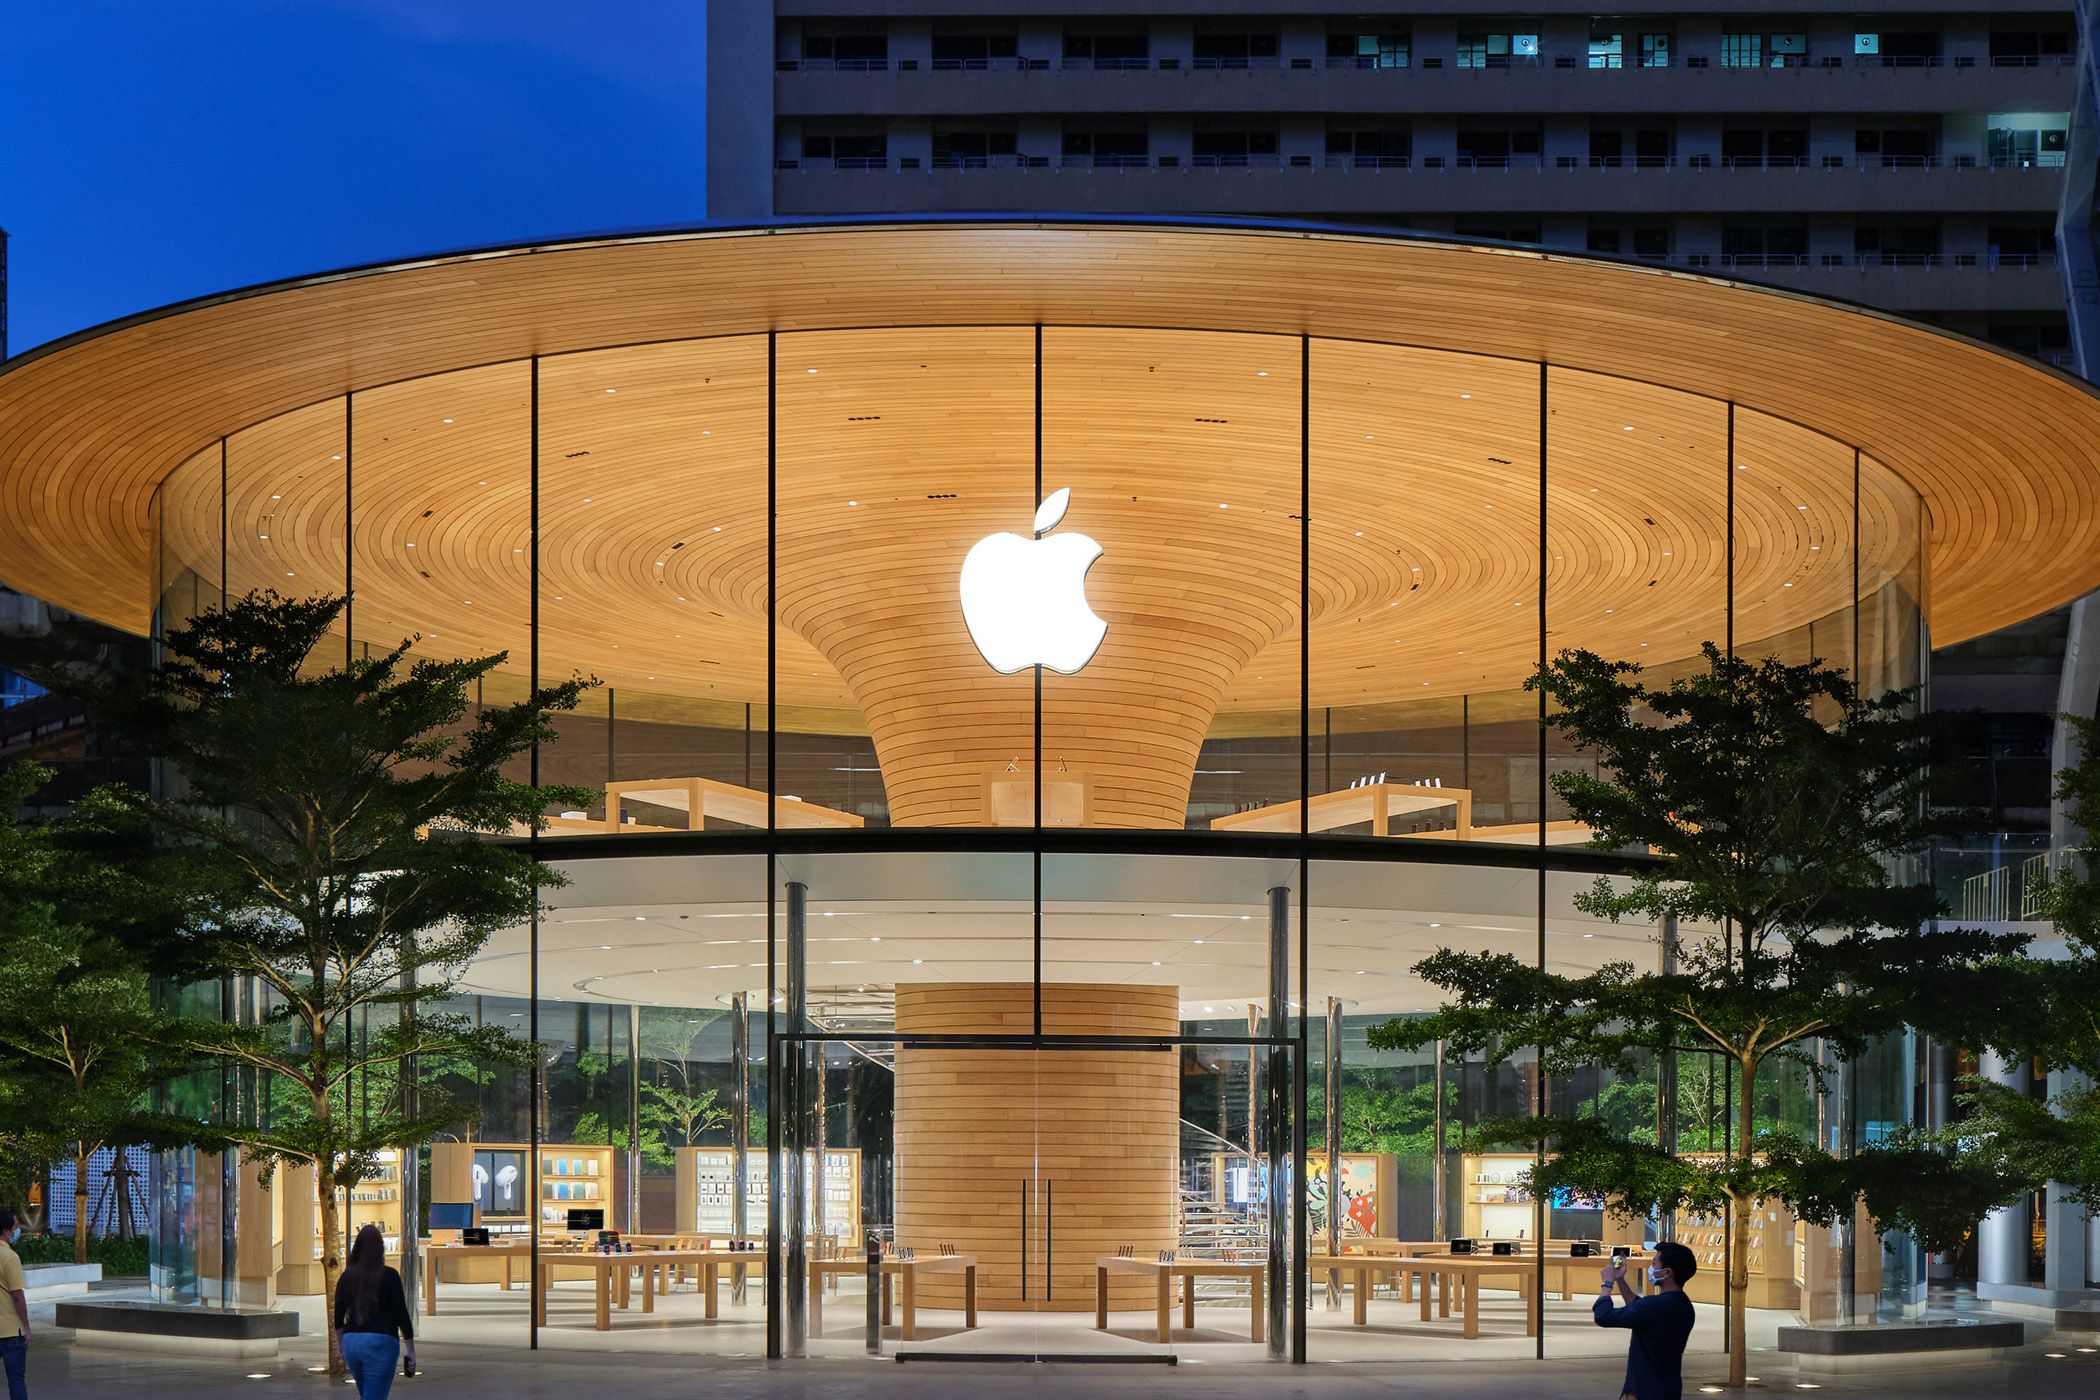 Illuminated Apple Store with a curved wooden design at dusk.